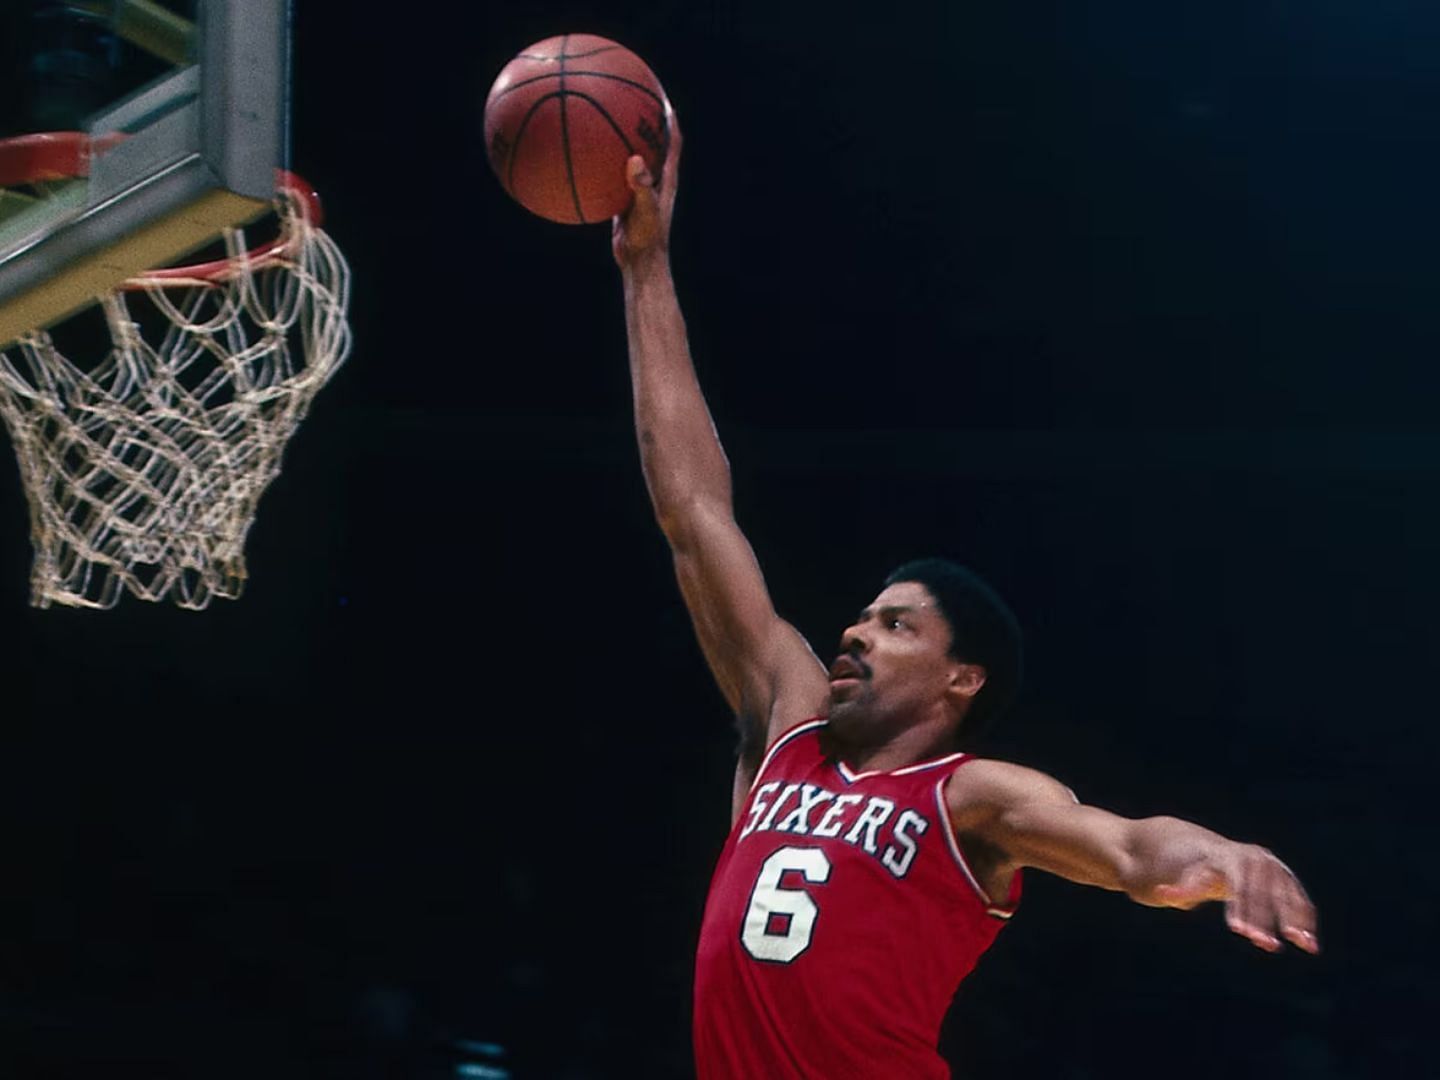 Julius Erving in action during an NBA game 